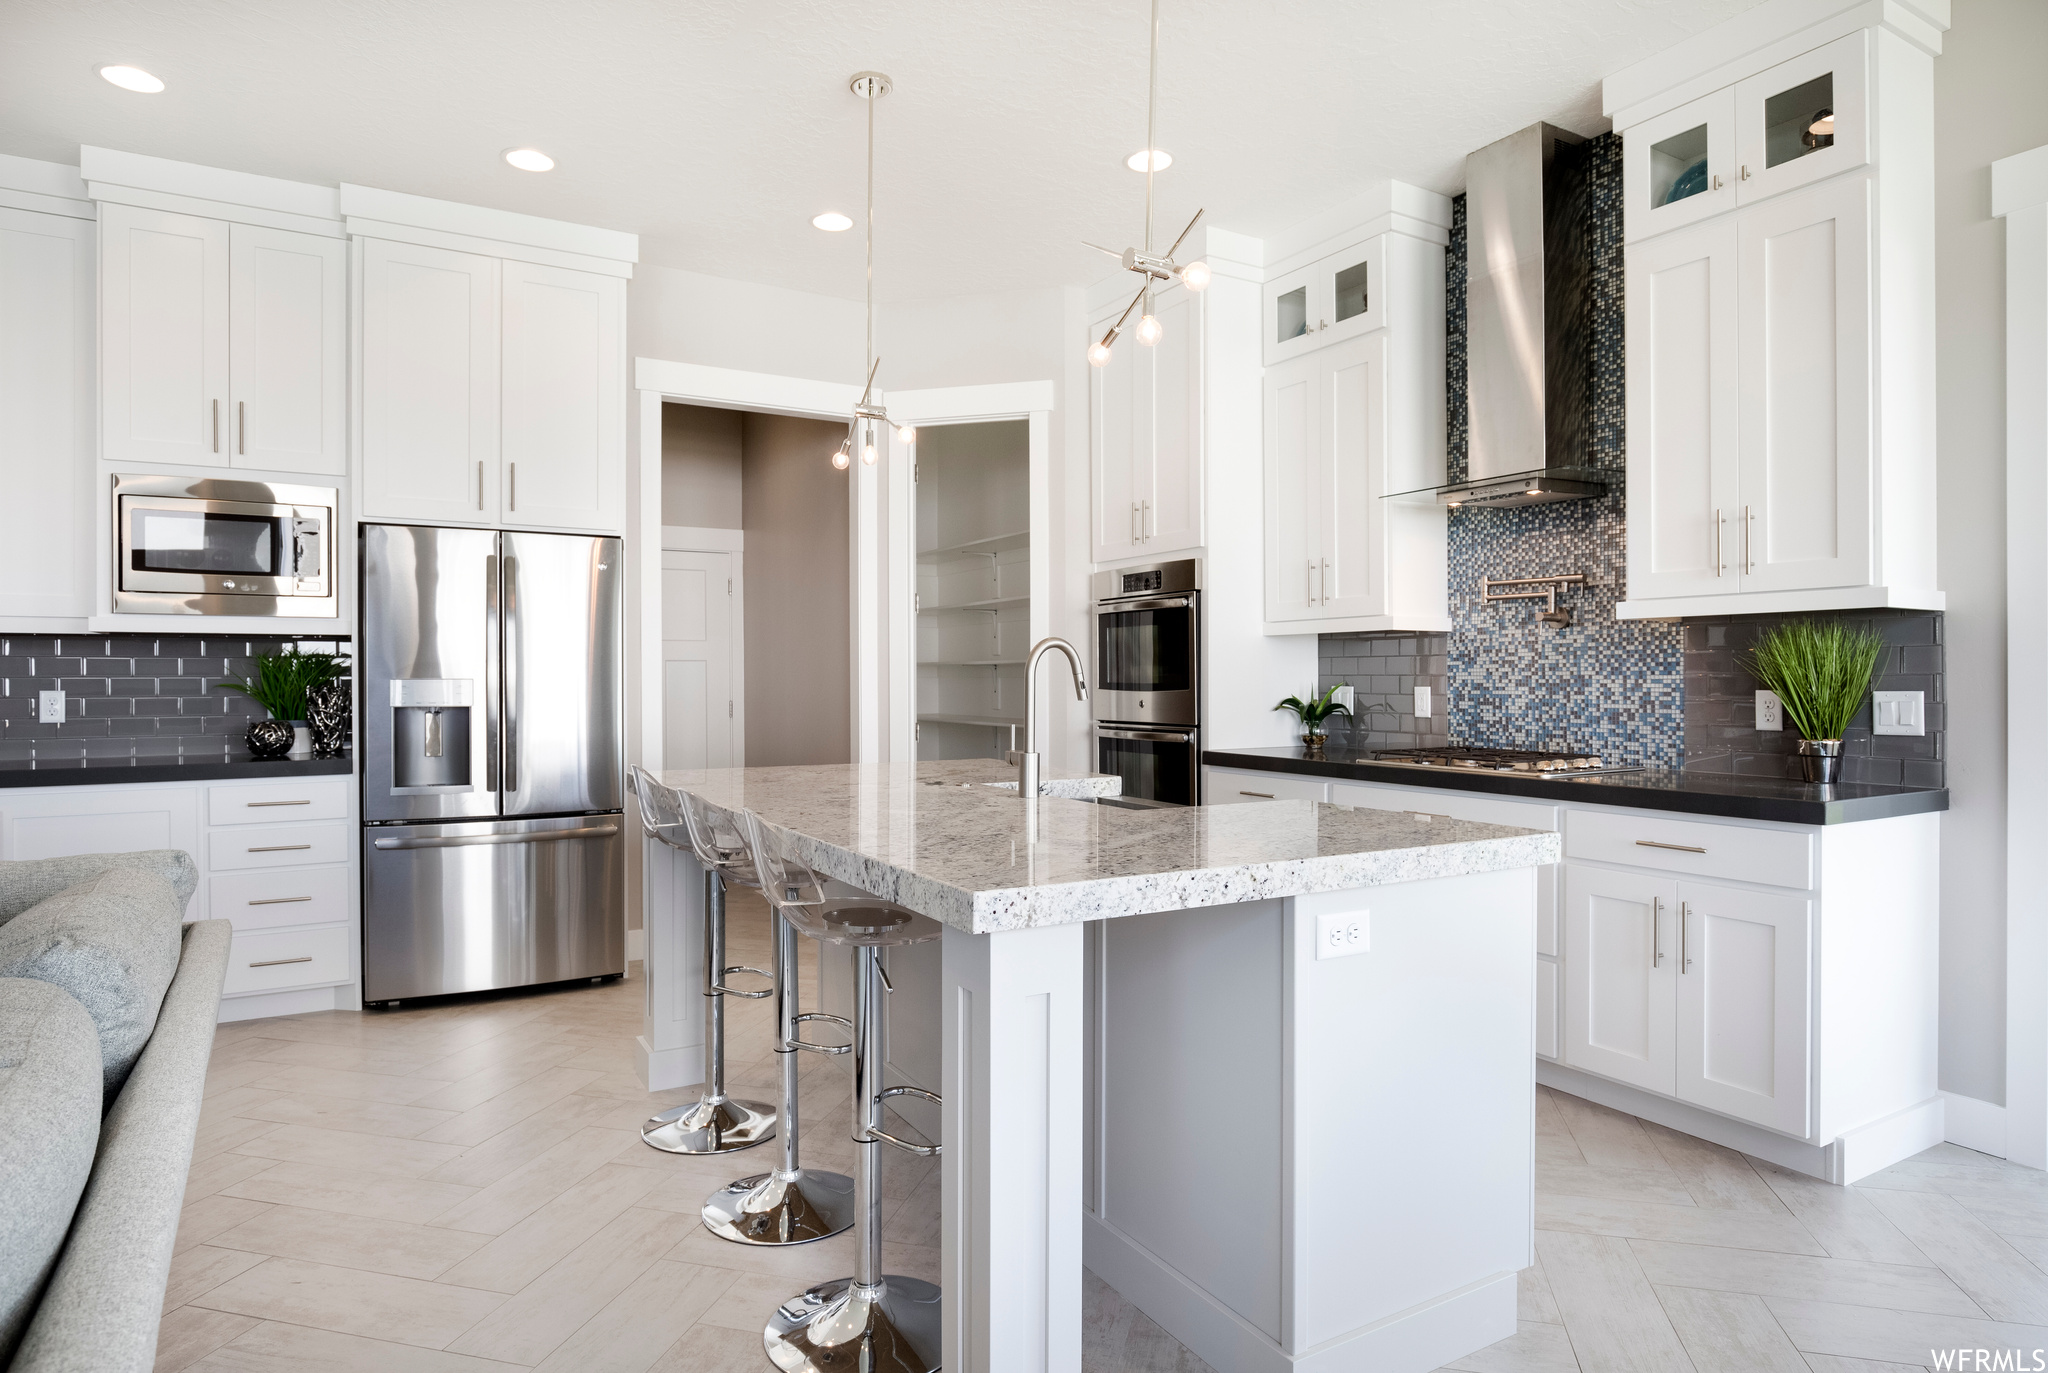 Kitchen featuring appliances with stainless steel finishes, wall chimney range hood, pendant lighting, white cabinets, and backsplash